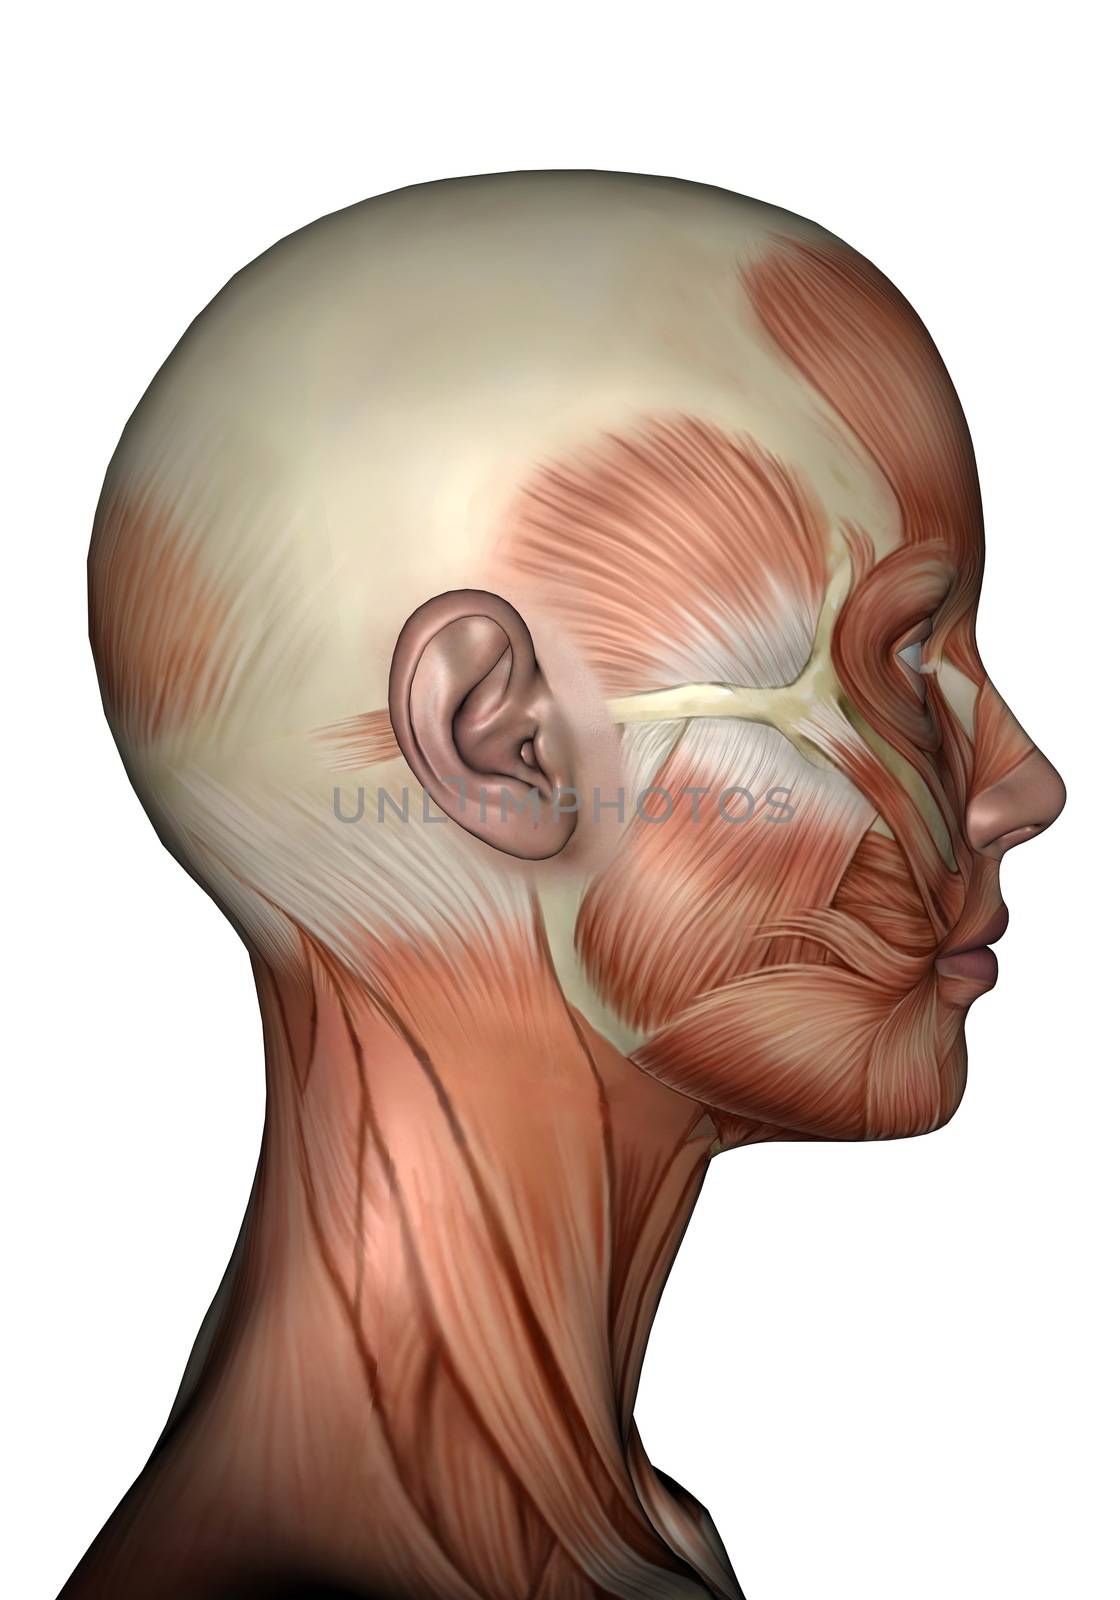 Profile head muscles of woman - 3D render by Elenaphotos21